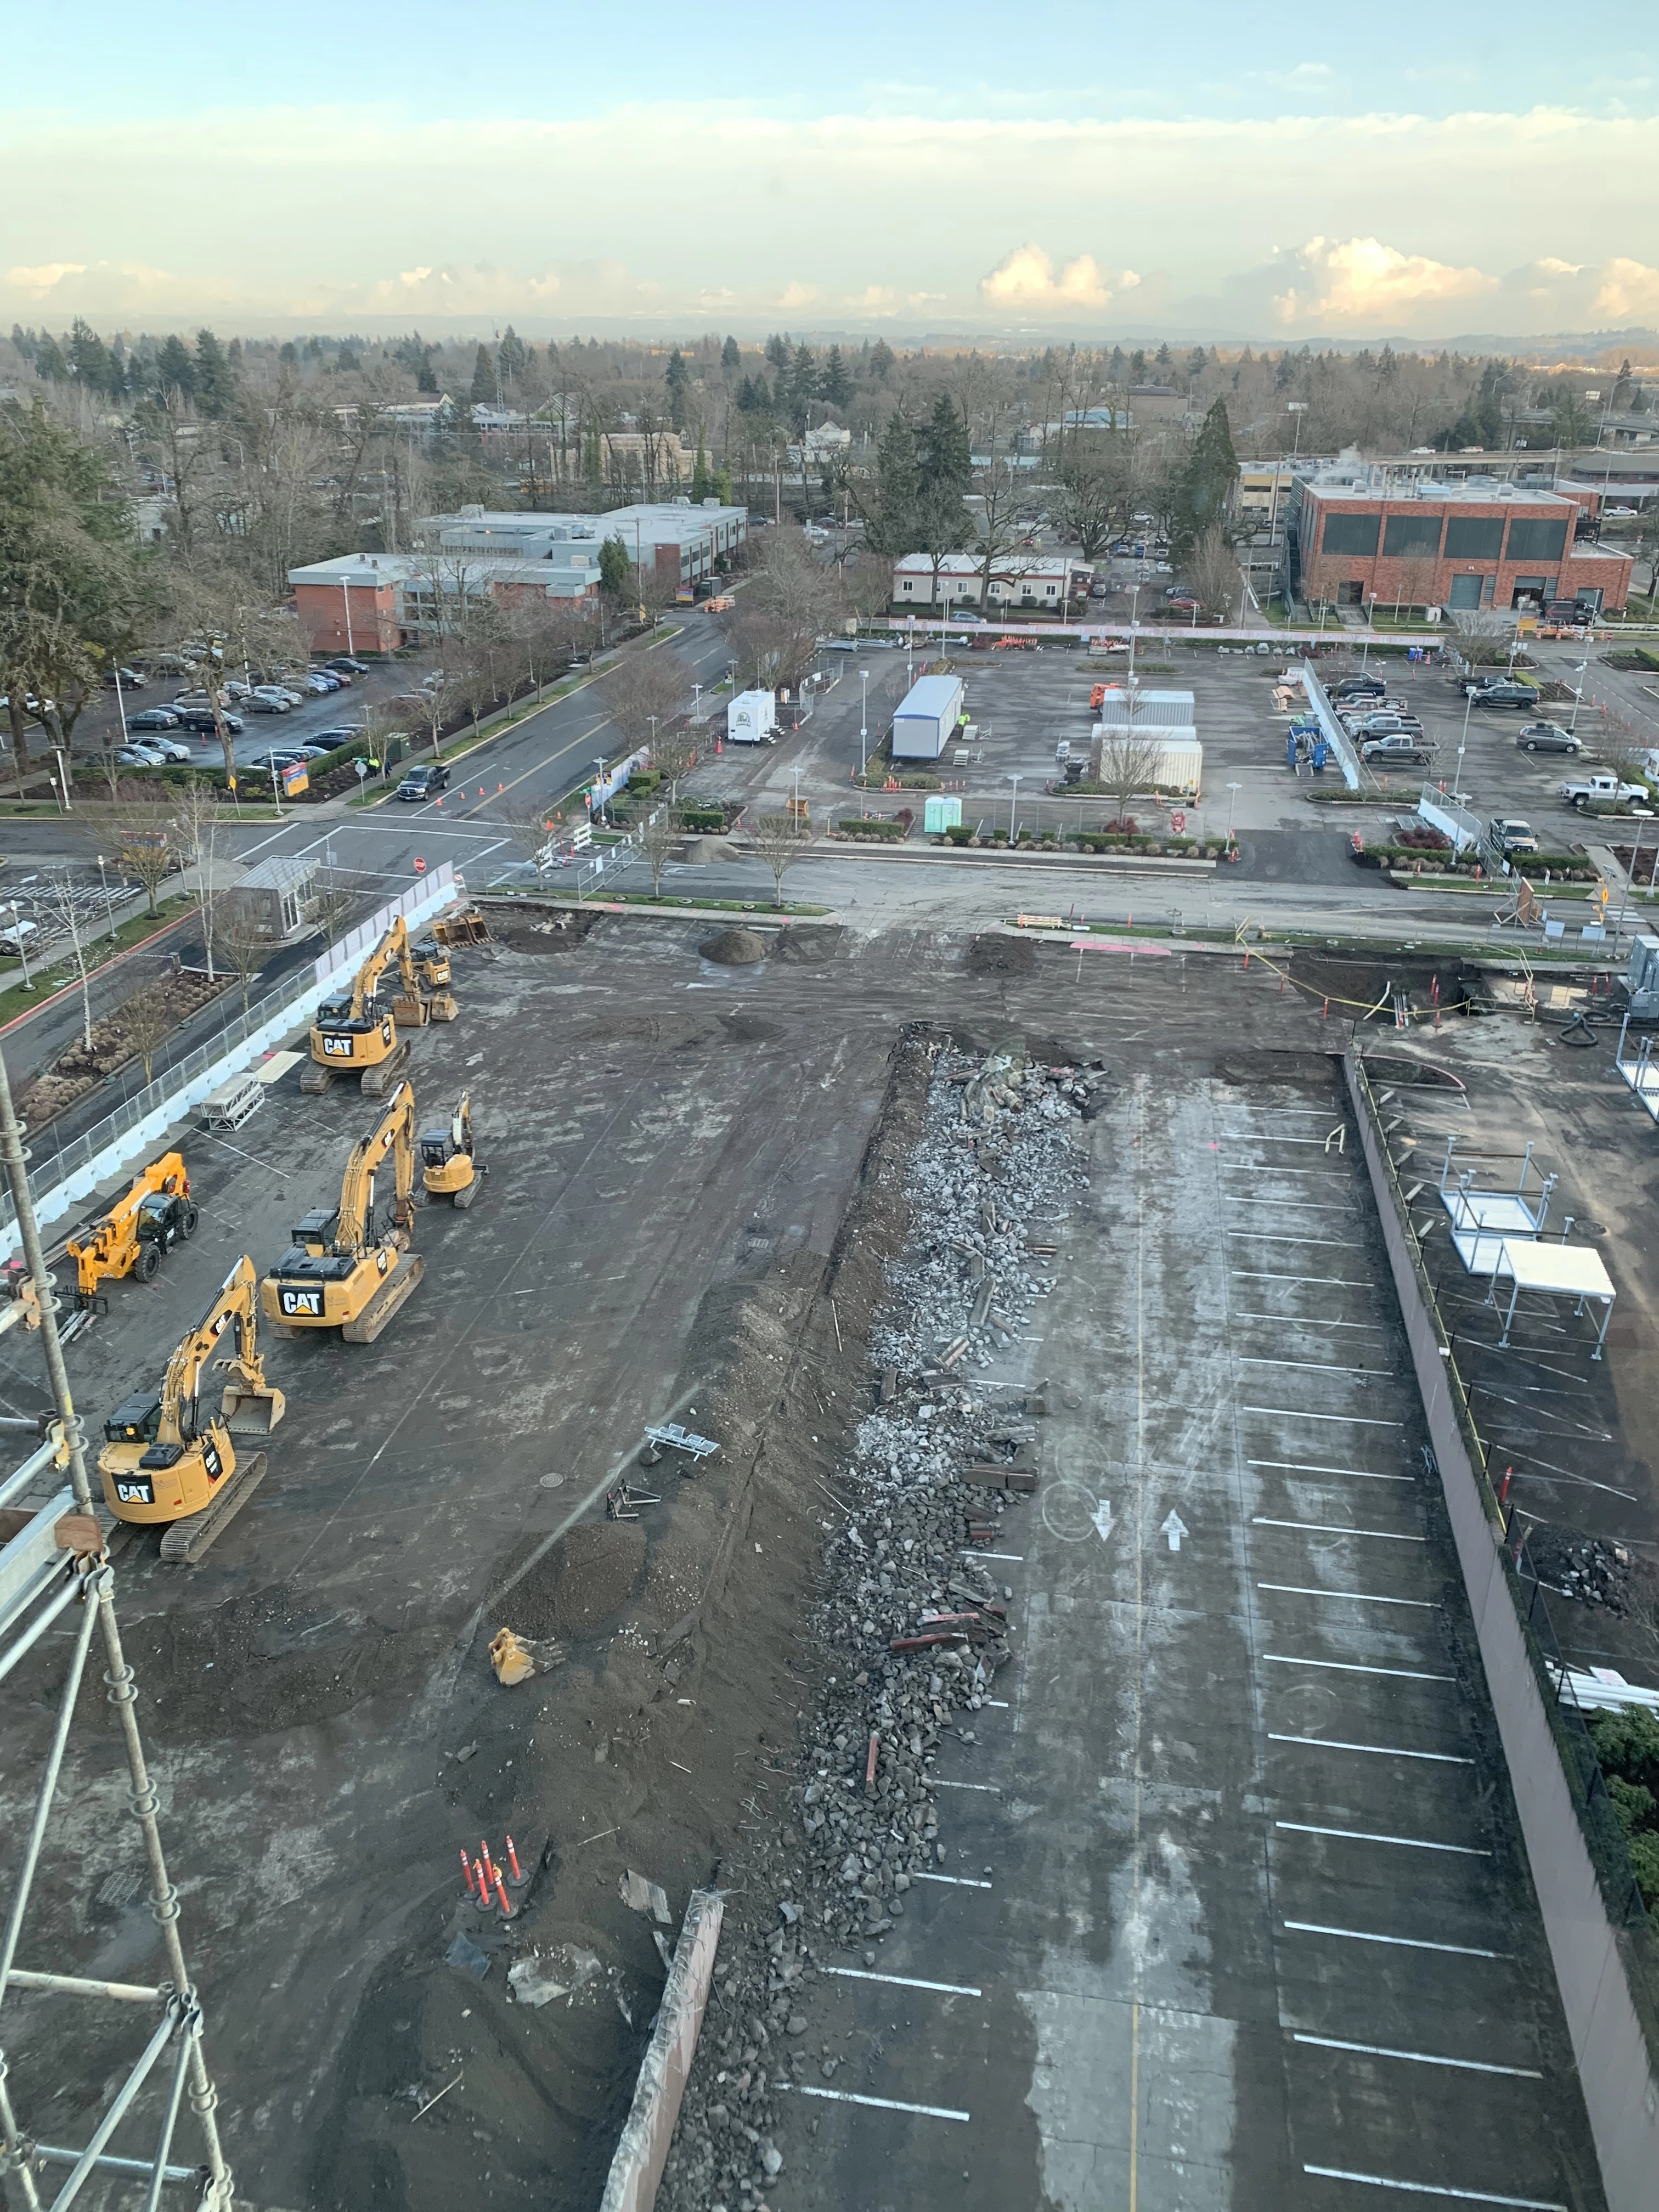 Demolition of the emergency department's parking lot